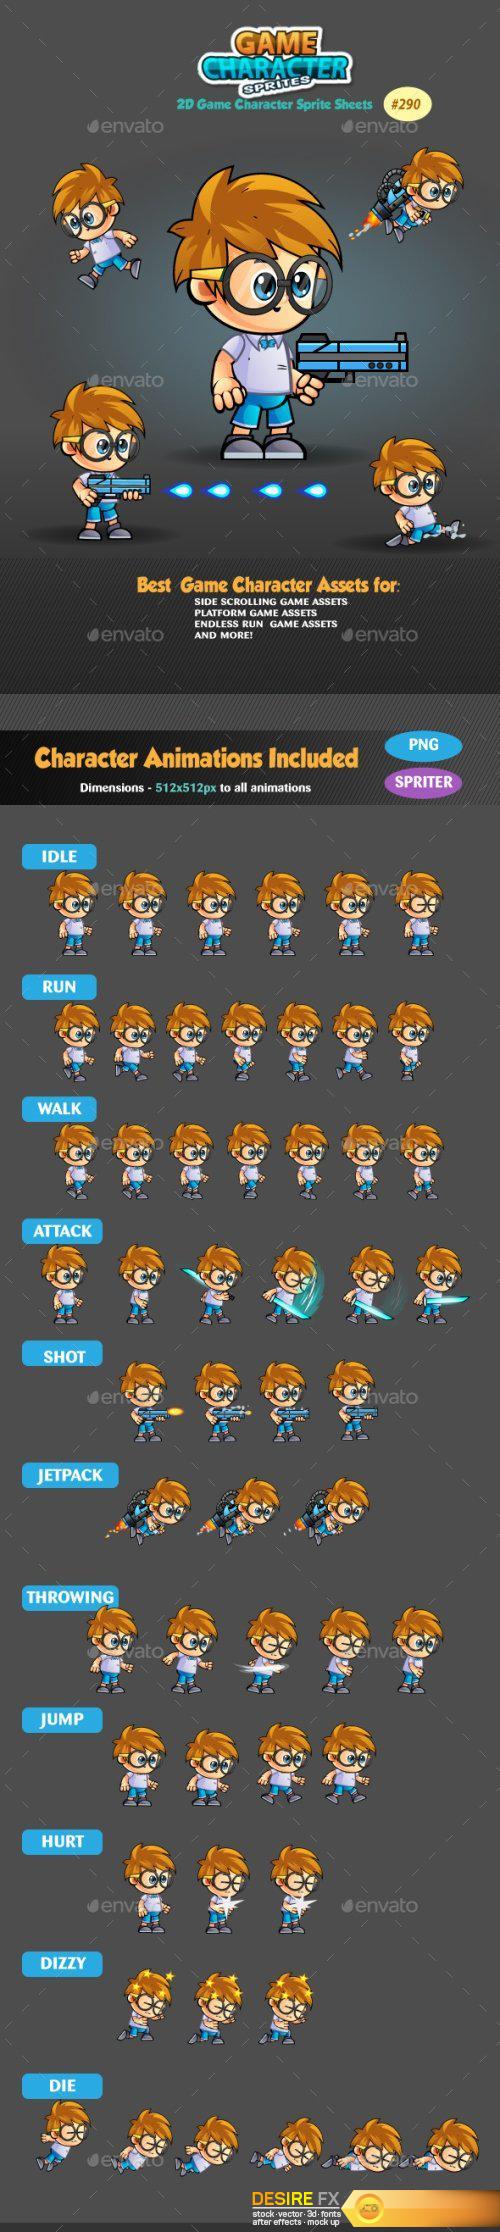 Graphicriver - 2D Game Character Sprites 290 19168020